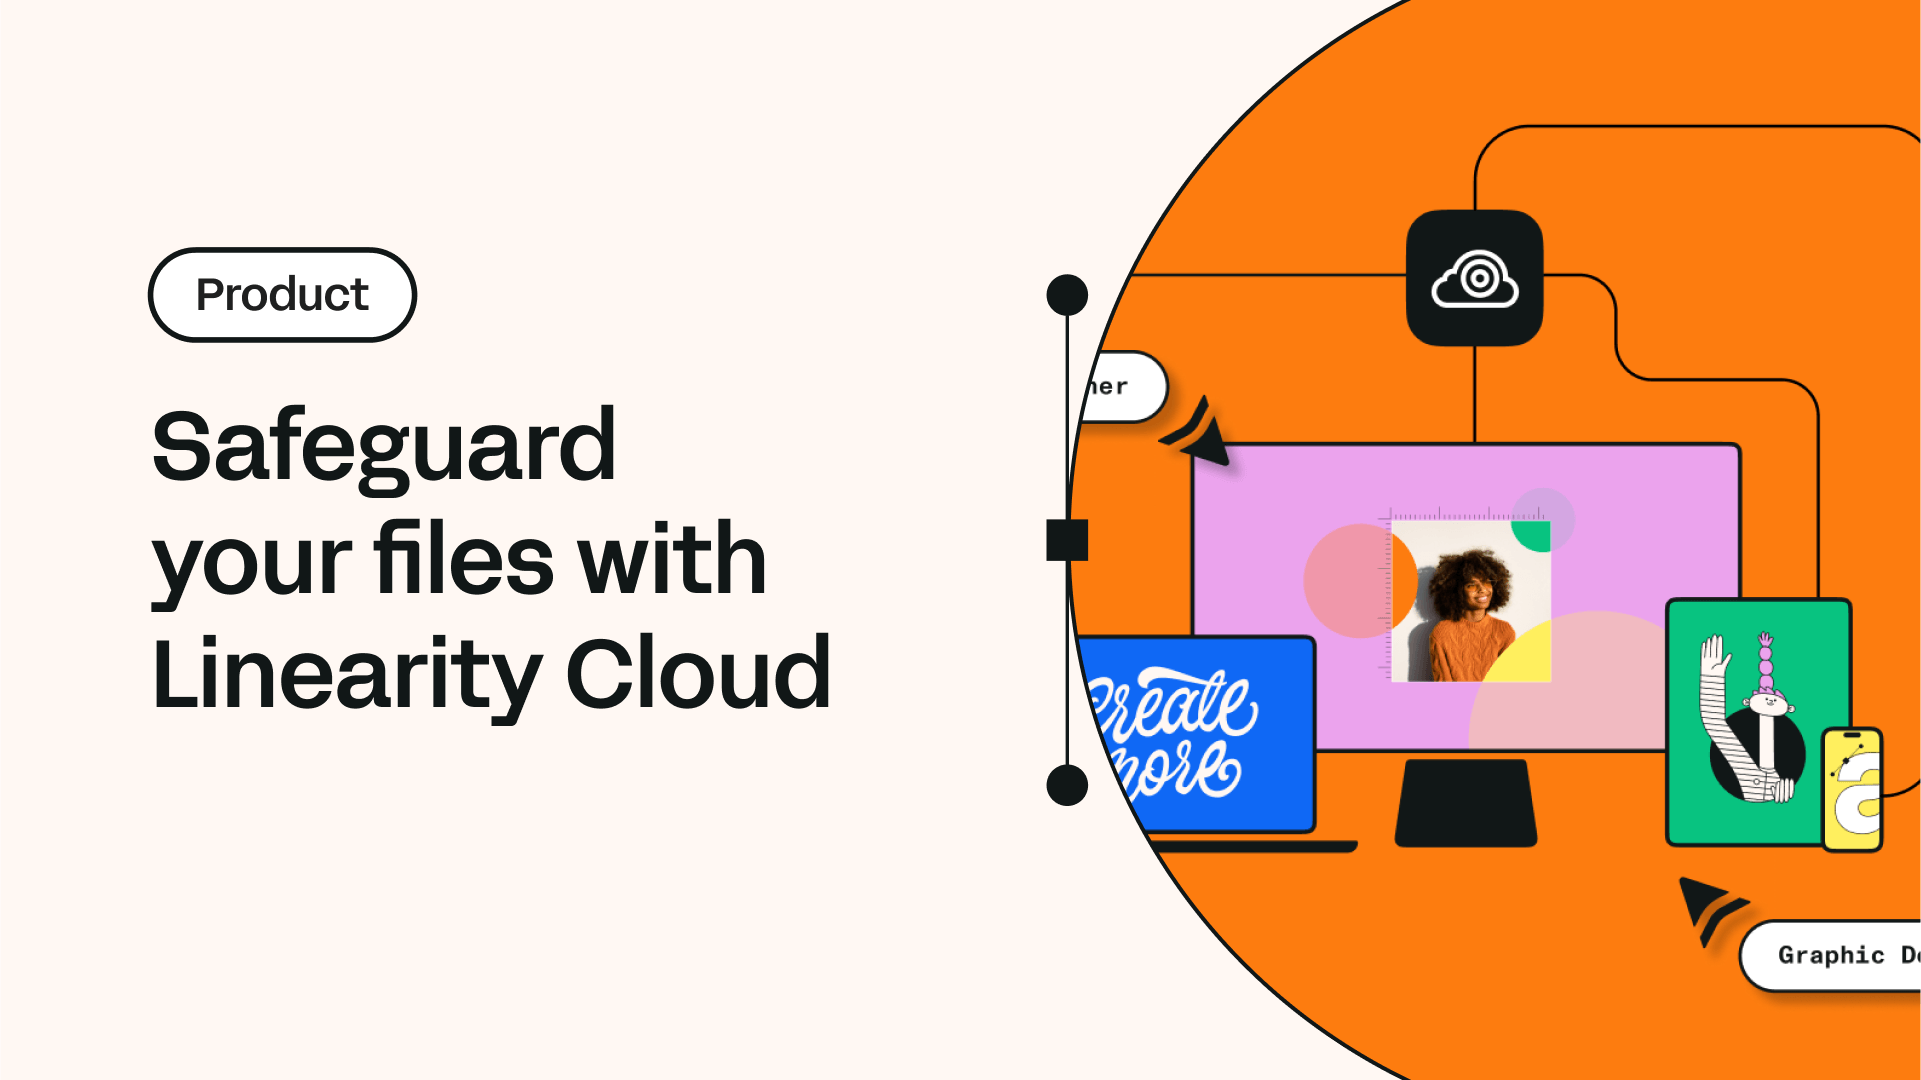 Safeguard your files with Linearity Cloud | Linearity